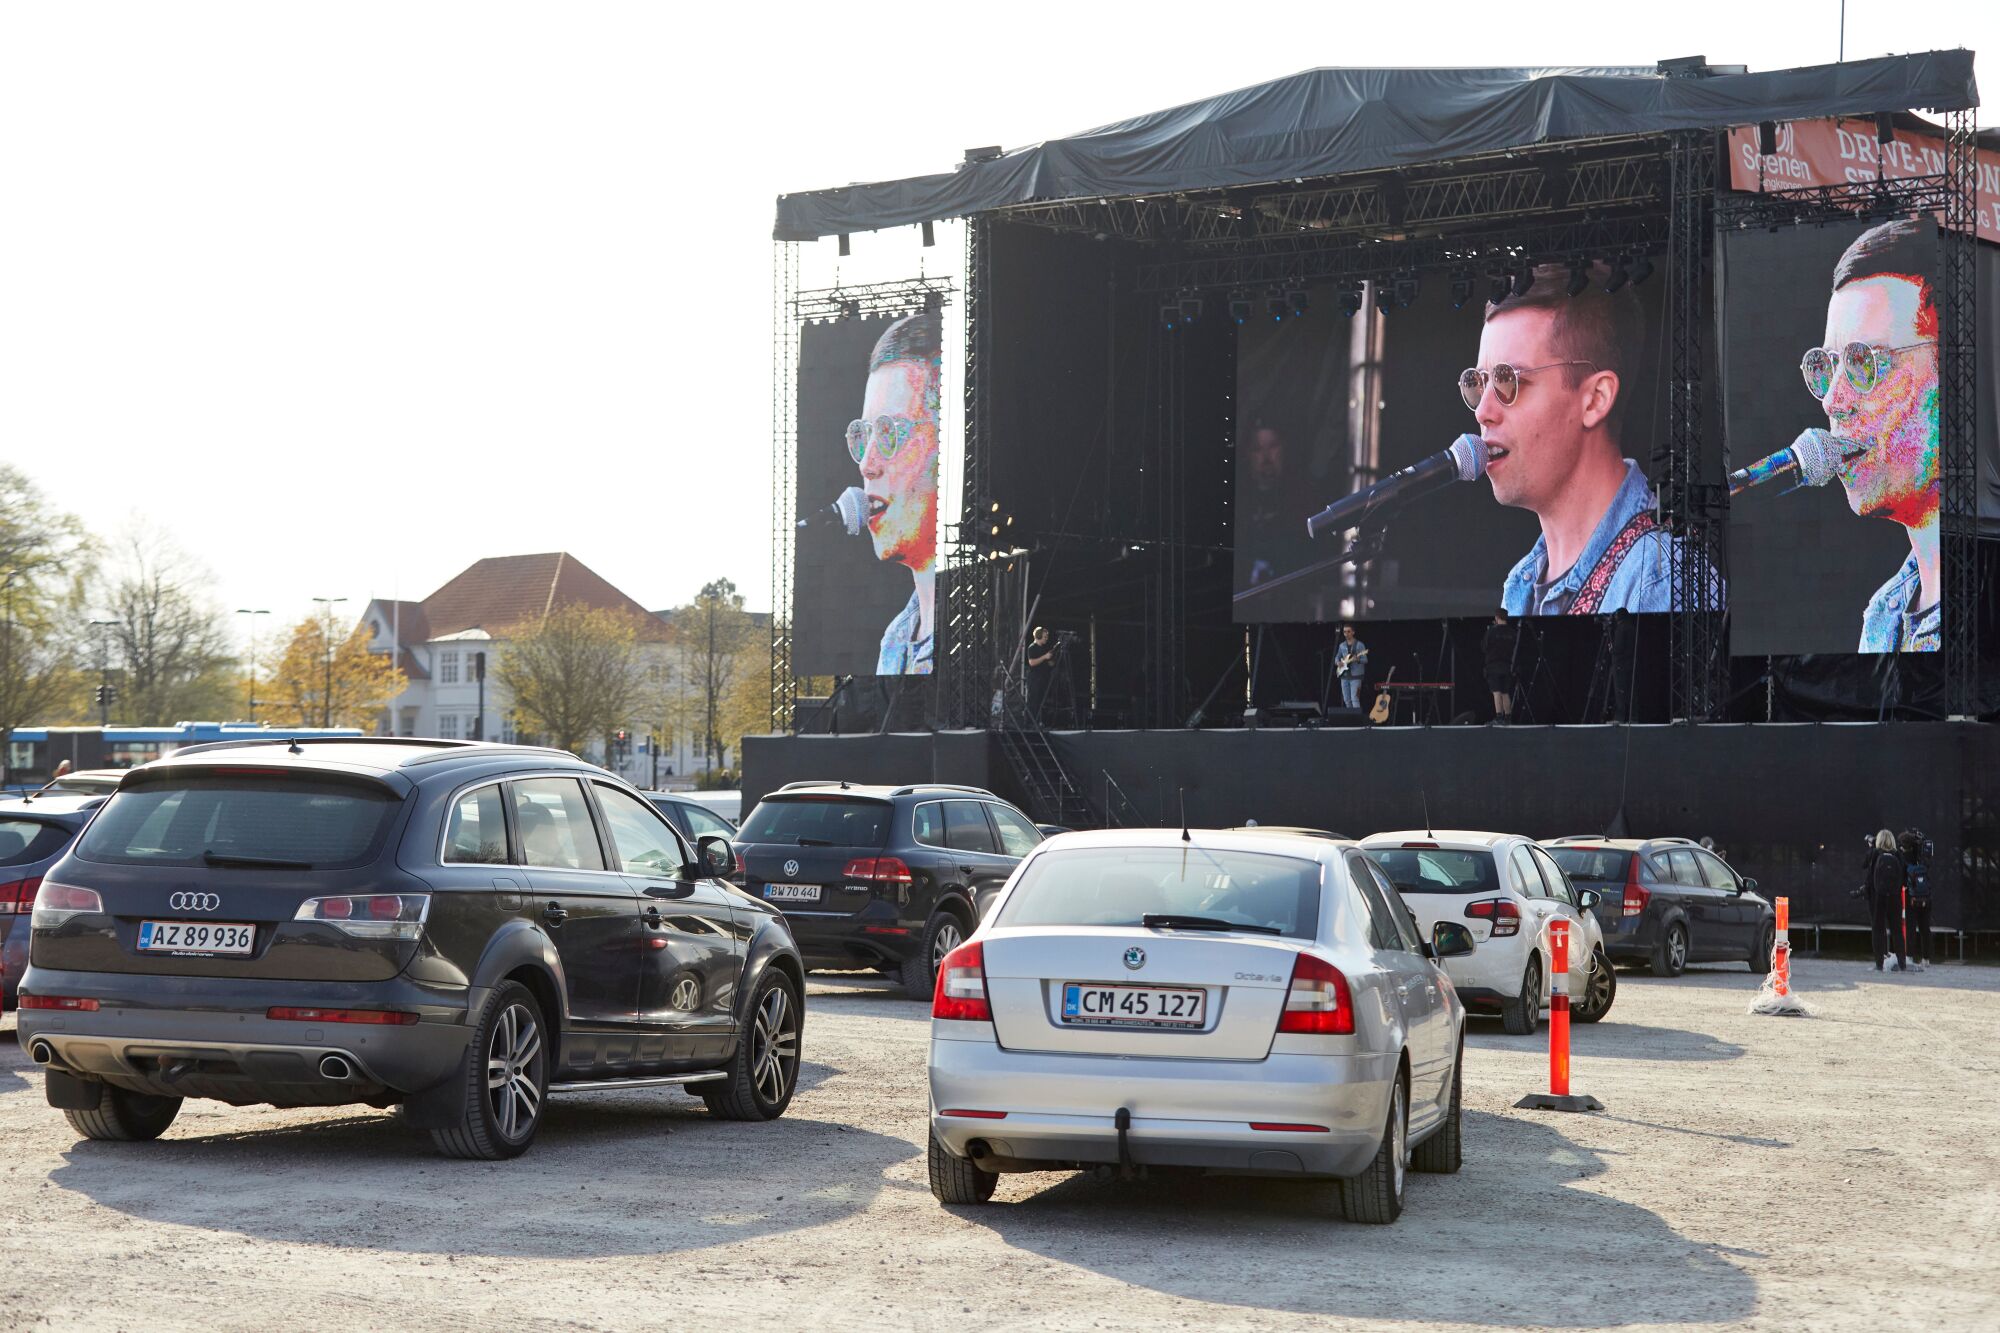 Mads Langer's April 24 drive-in concert in Aarhus, Denmark, drew a sell-out crowd.